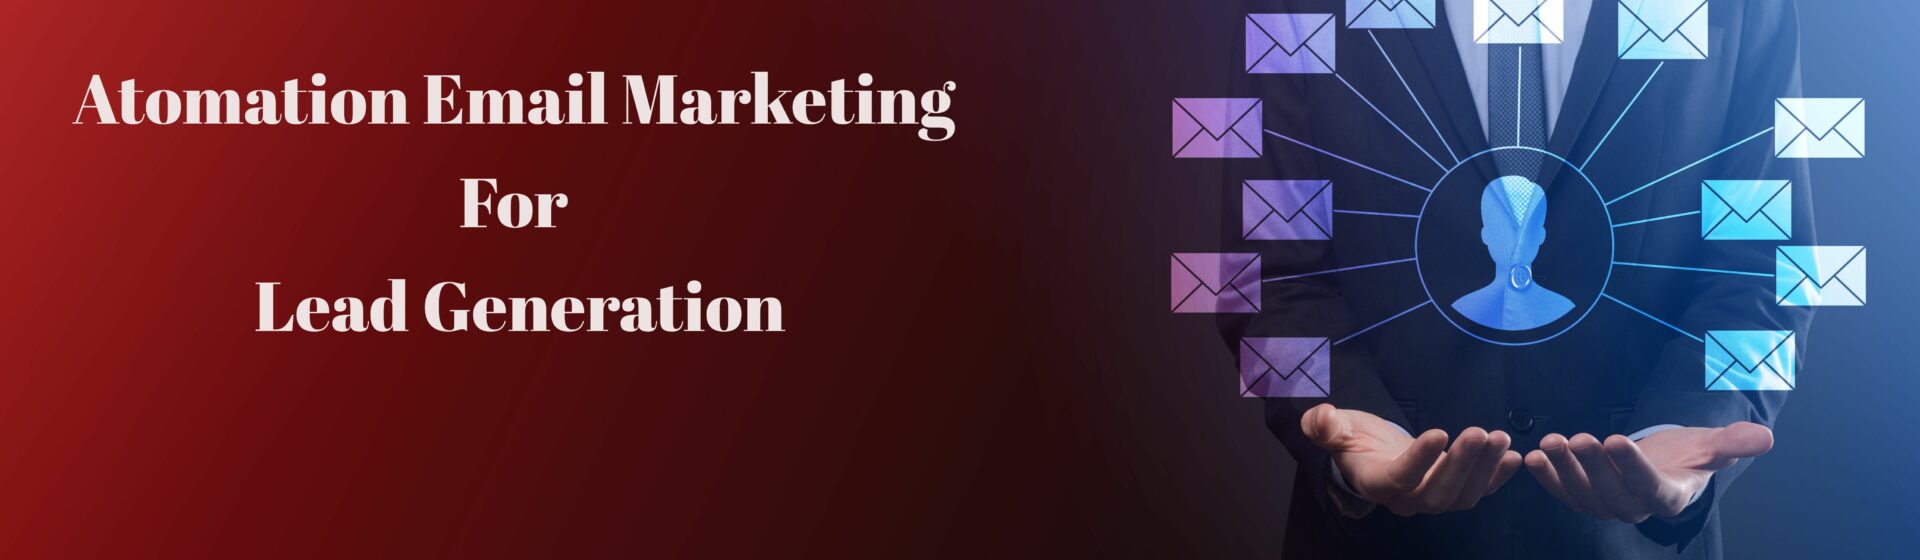 automation email marketing for lead generation